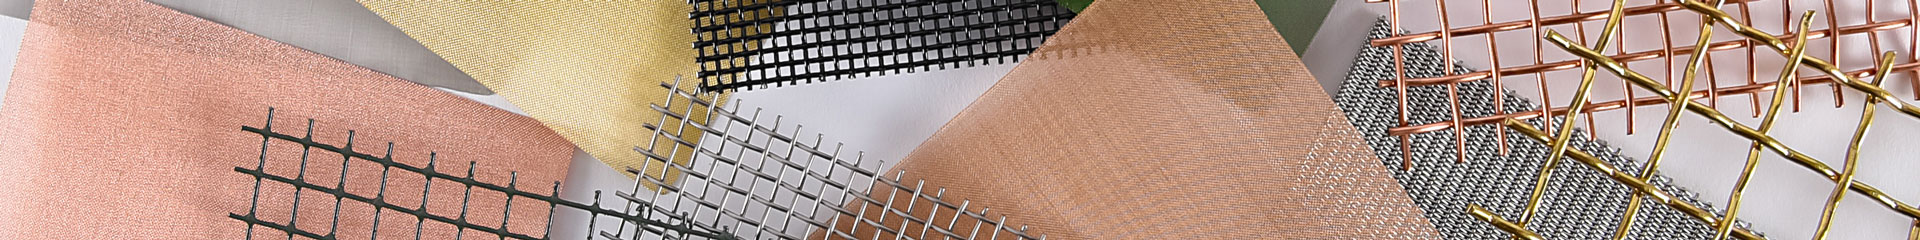 Square wire mesh materials in a variety of metals and brightly colored craft paper